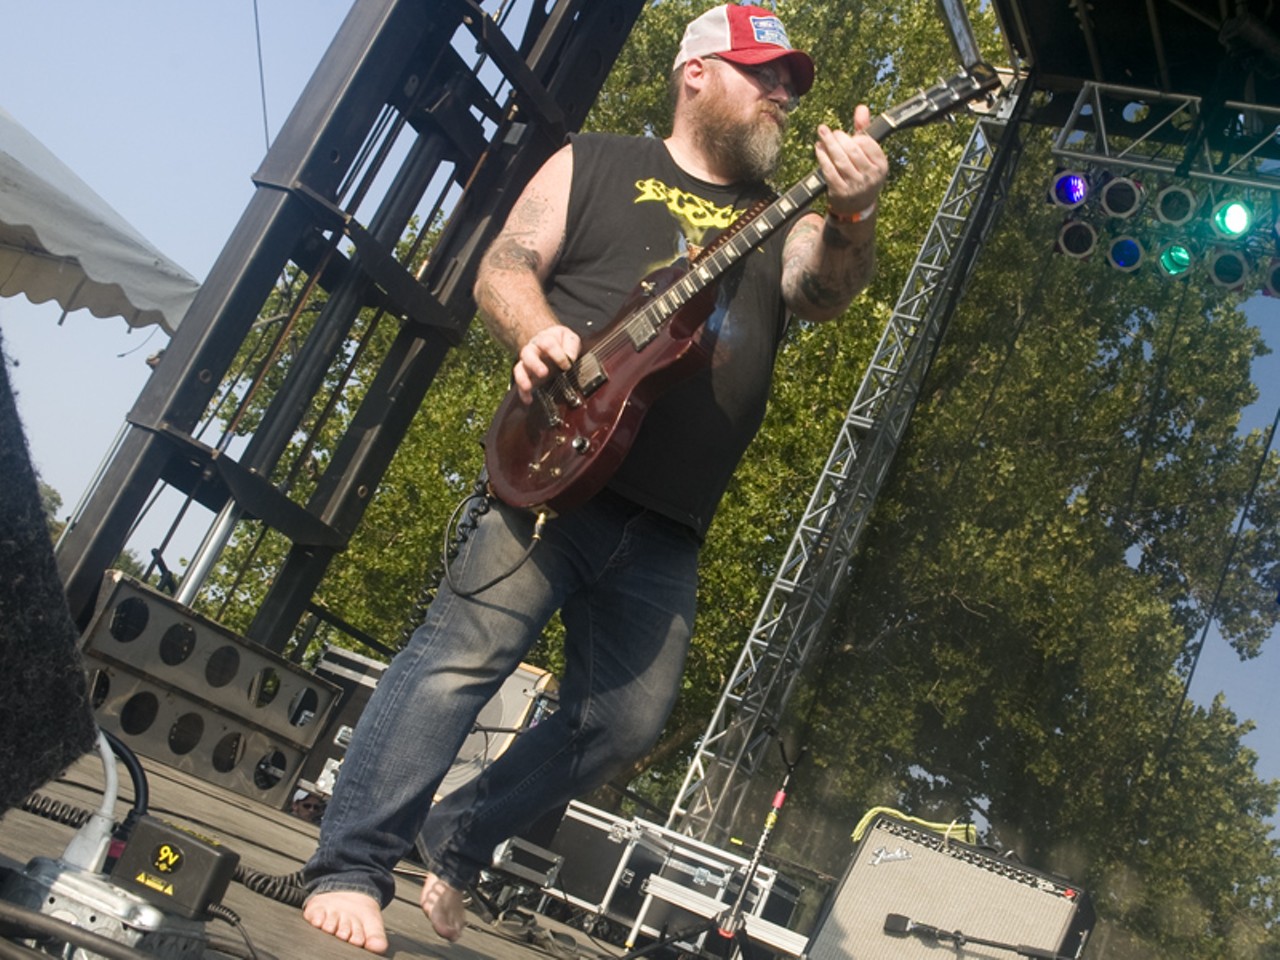 Lucero performing at LouFest.